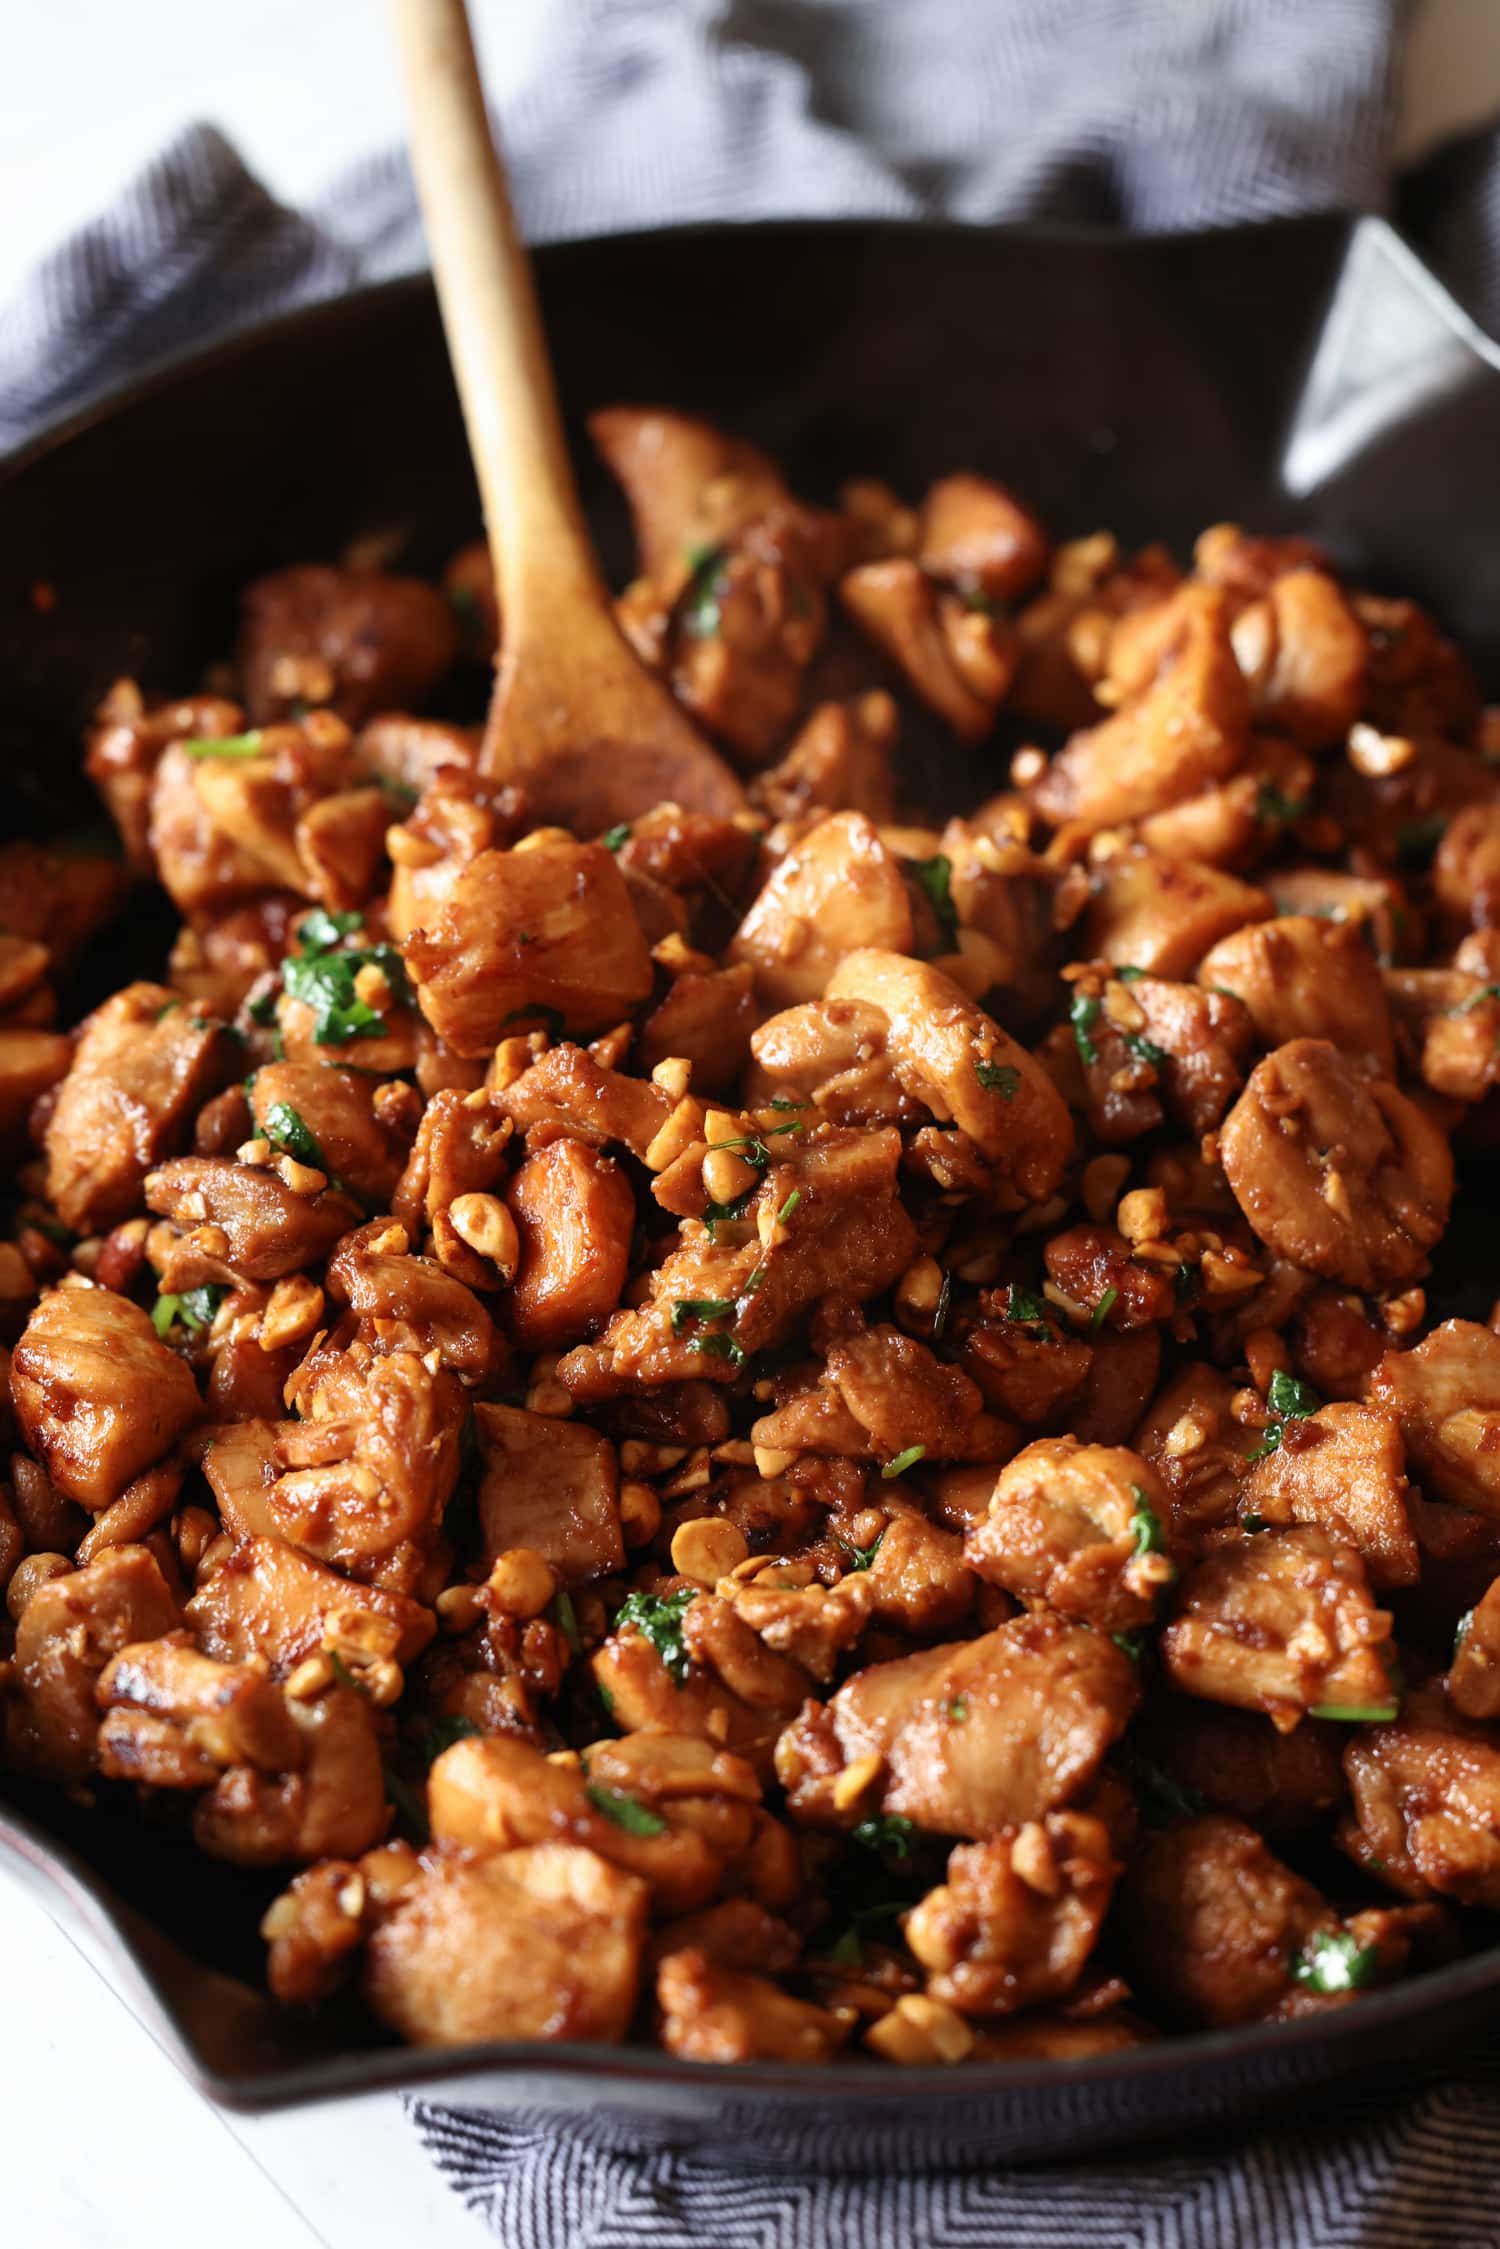 Cook the ginger chicken in a cast iron skillet, stirring with a wooden spoon.